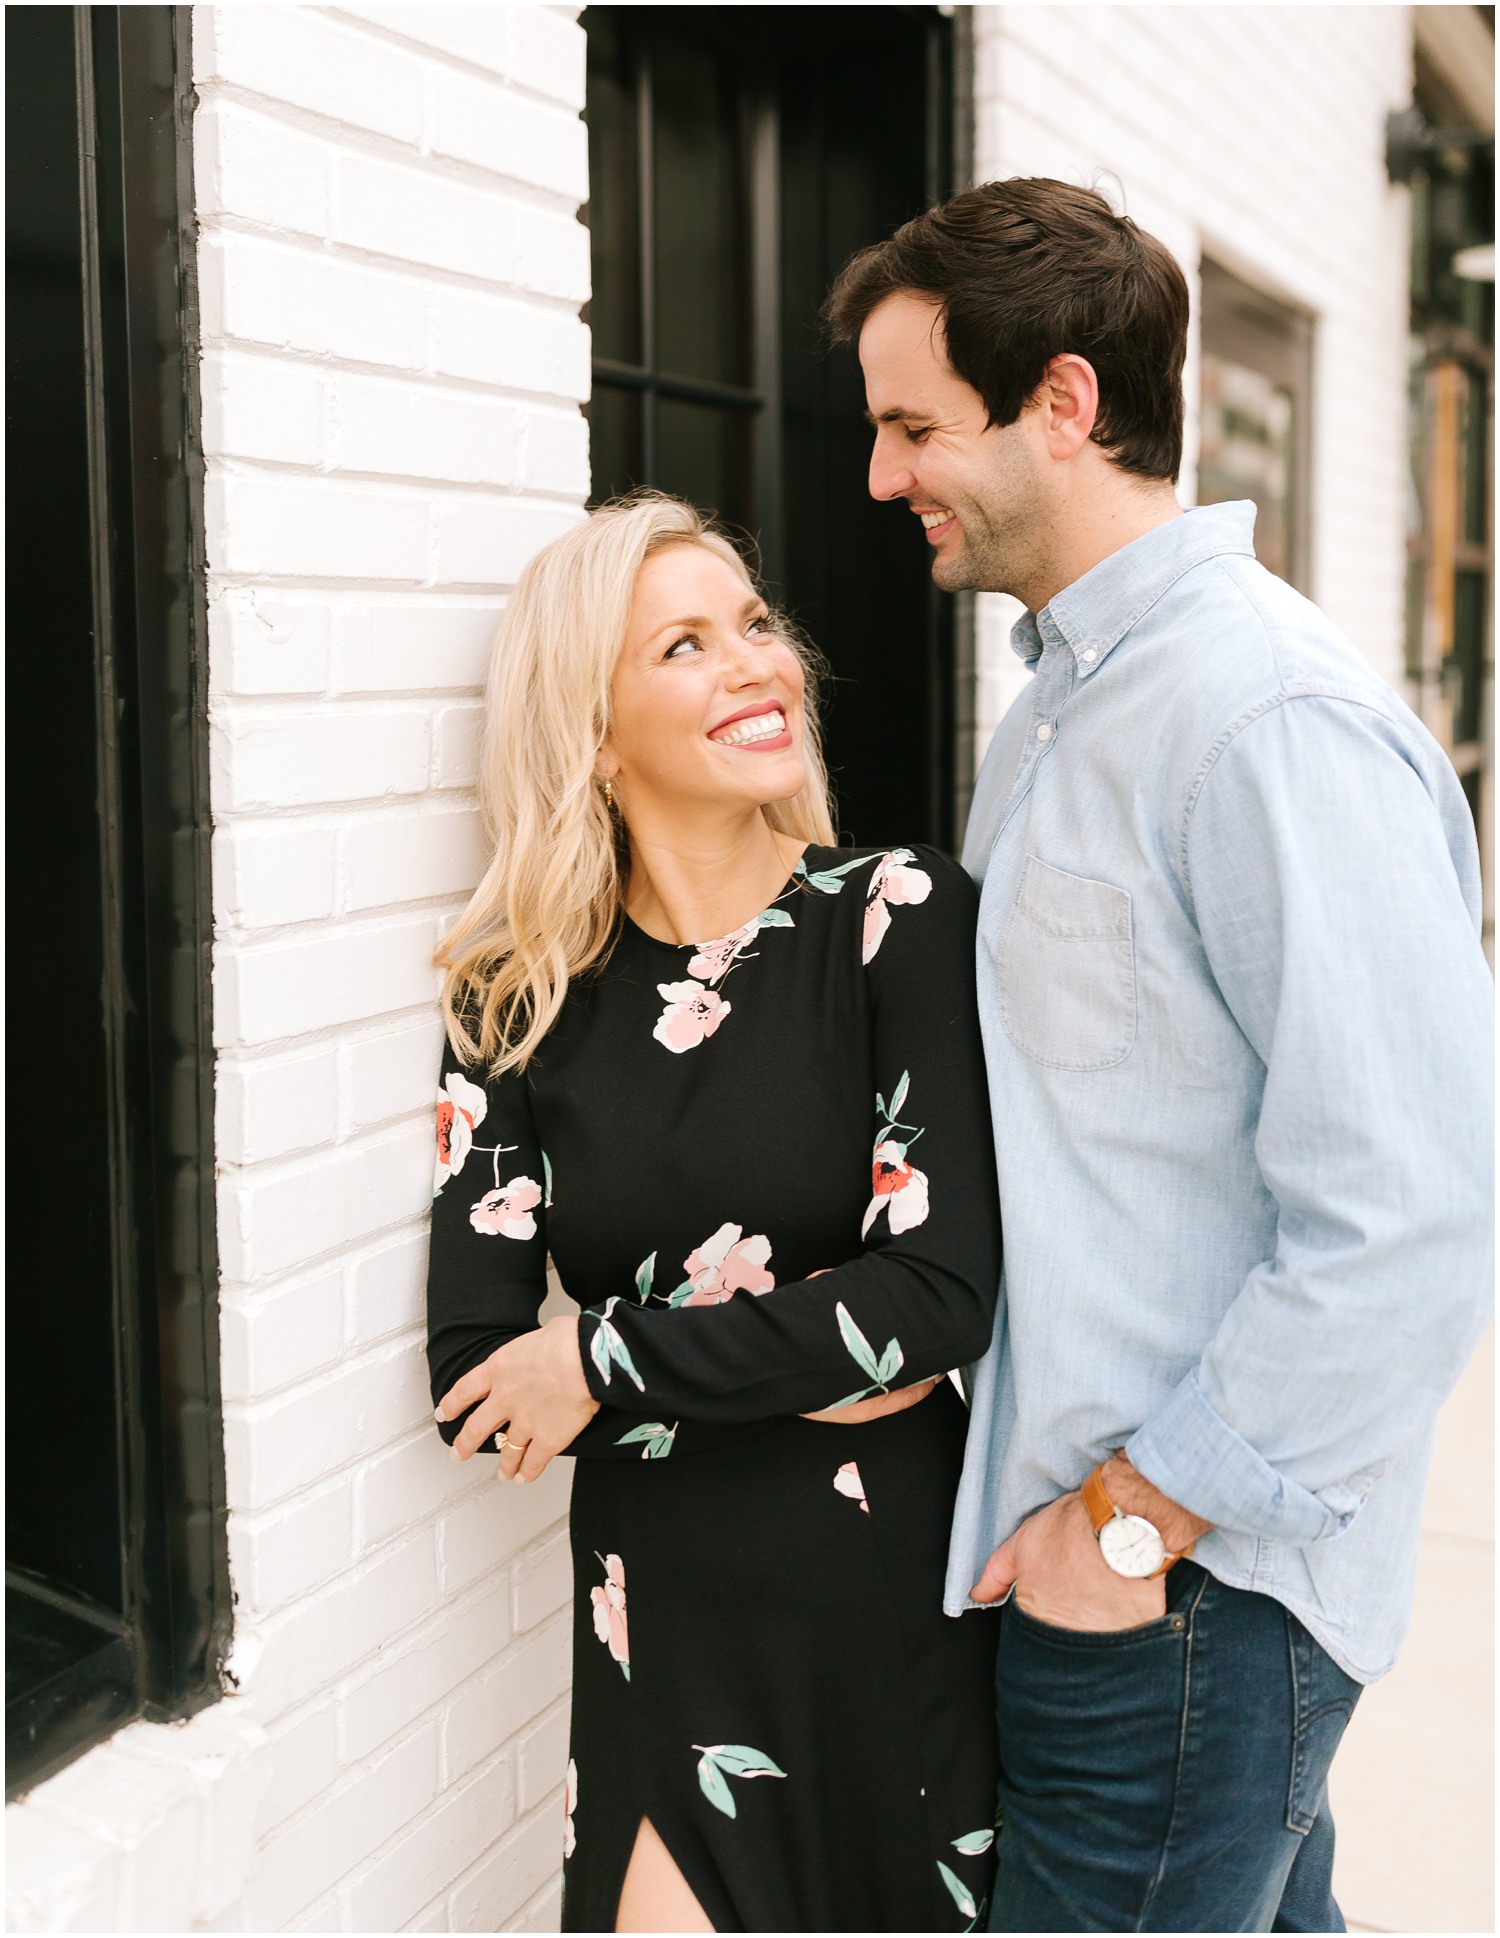 bride wears black gown with flowers and looks at groom in blue button up shirt during engagement portraits